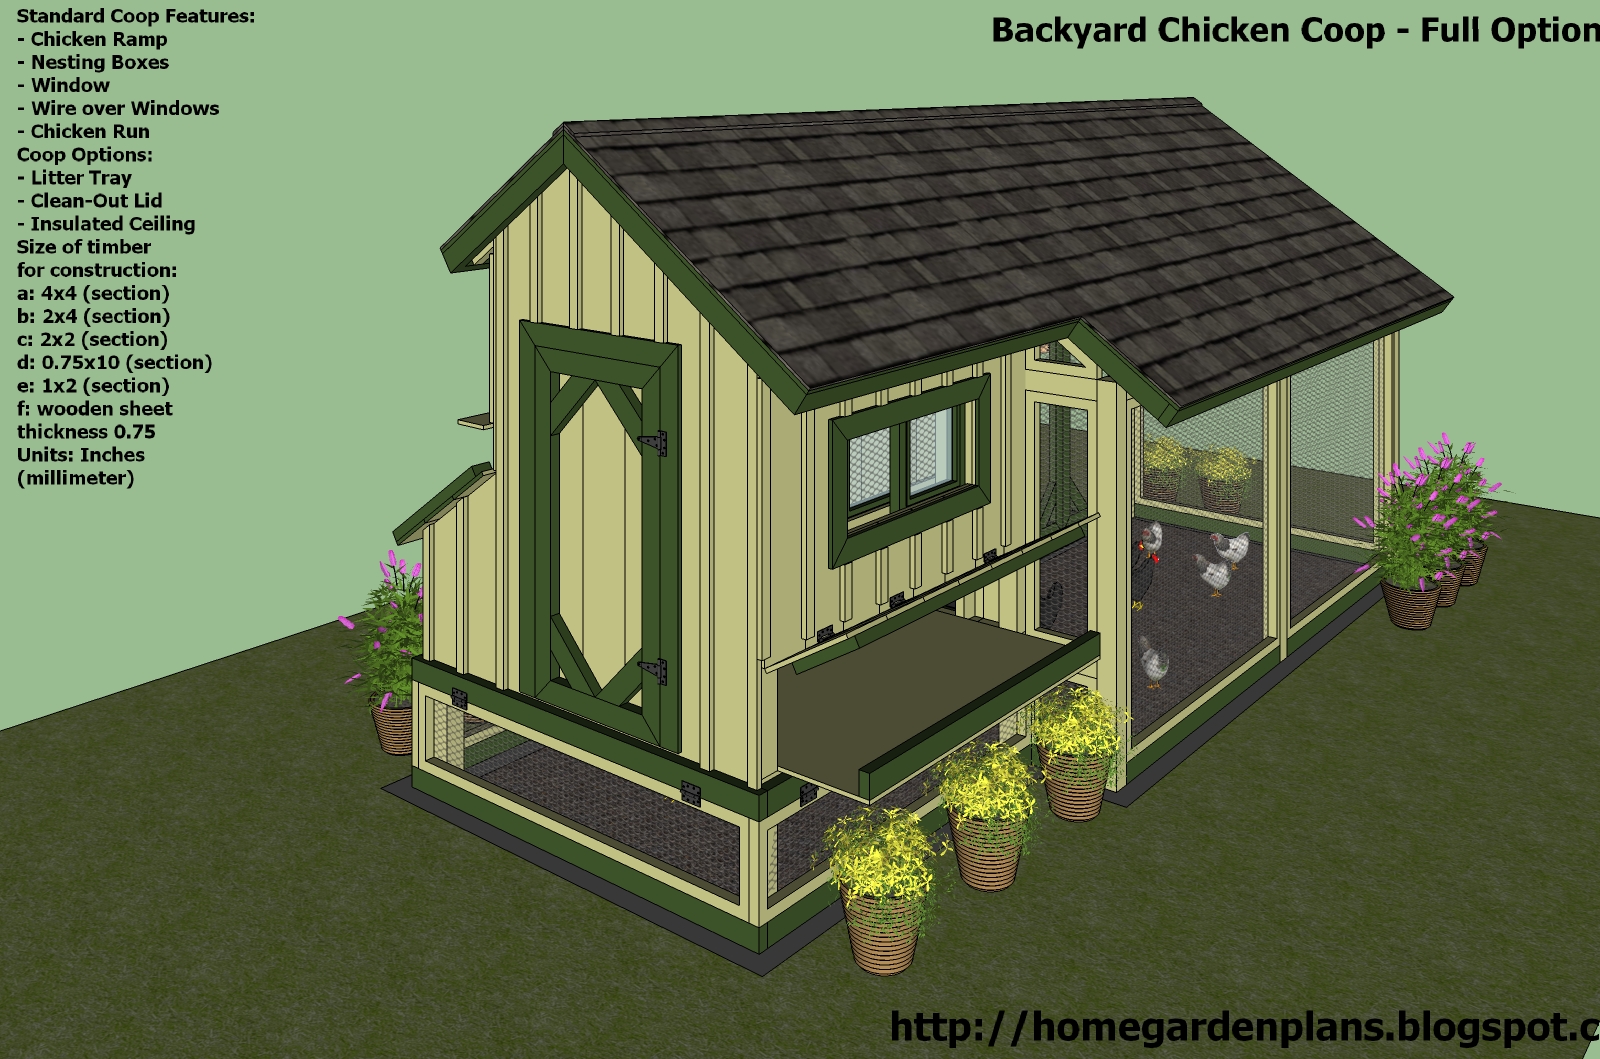 Free chicken coop plans for 20 hens Learn how - Pc7+chicken+coop+plans